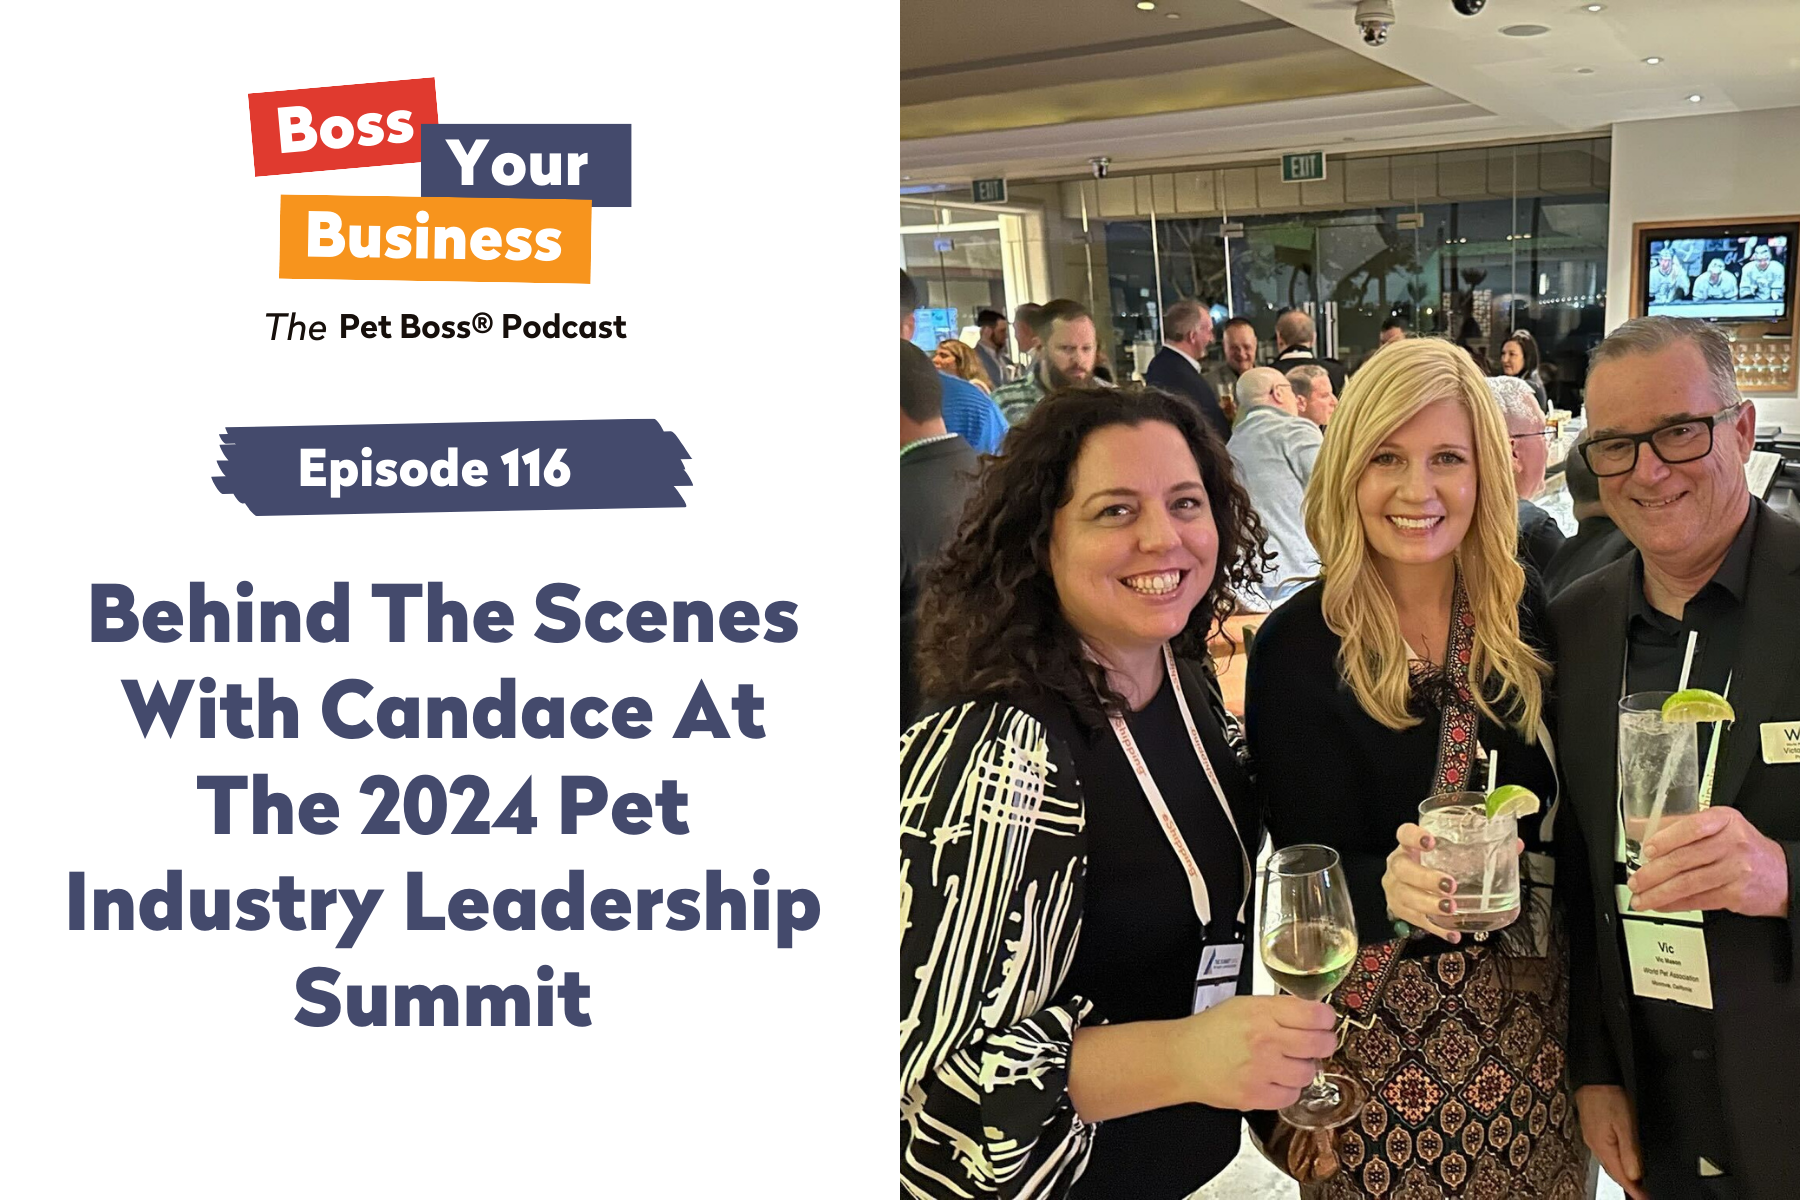 Pet Boss Nation Episode 116 | Behind The Scenes With Candace At The 2024 Pet Industry Leadership Summit